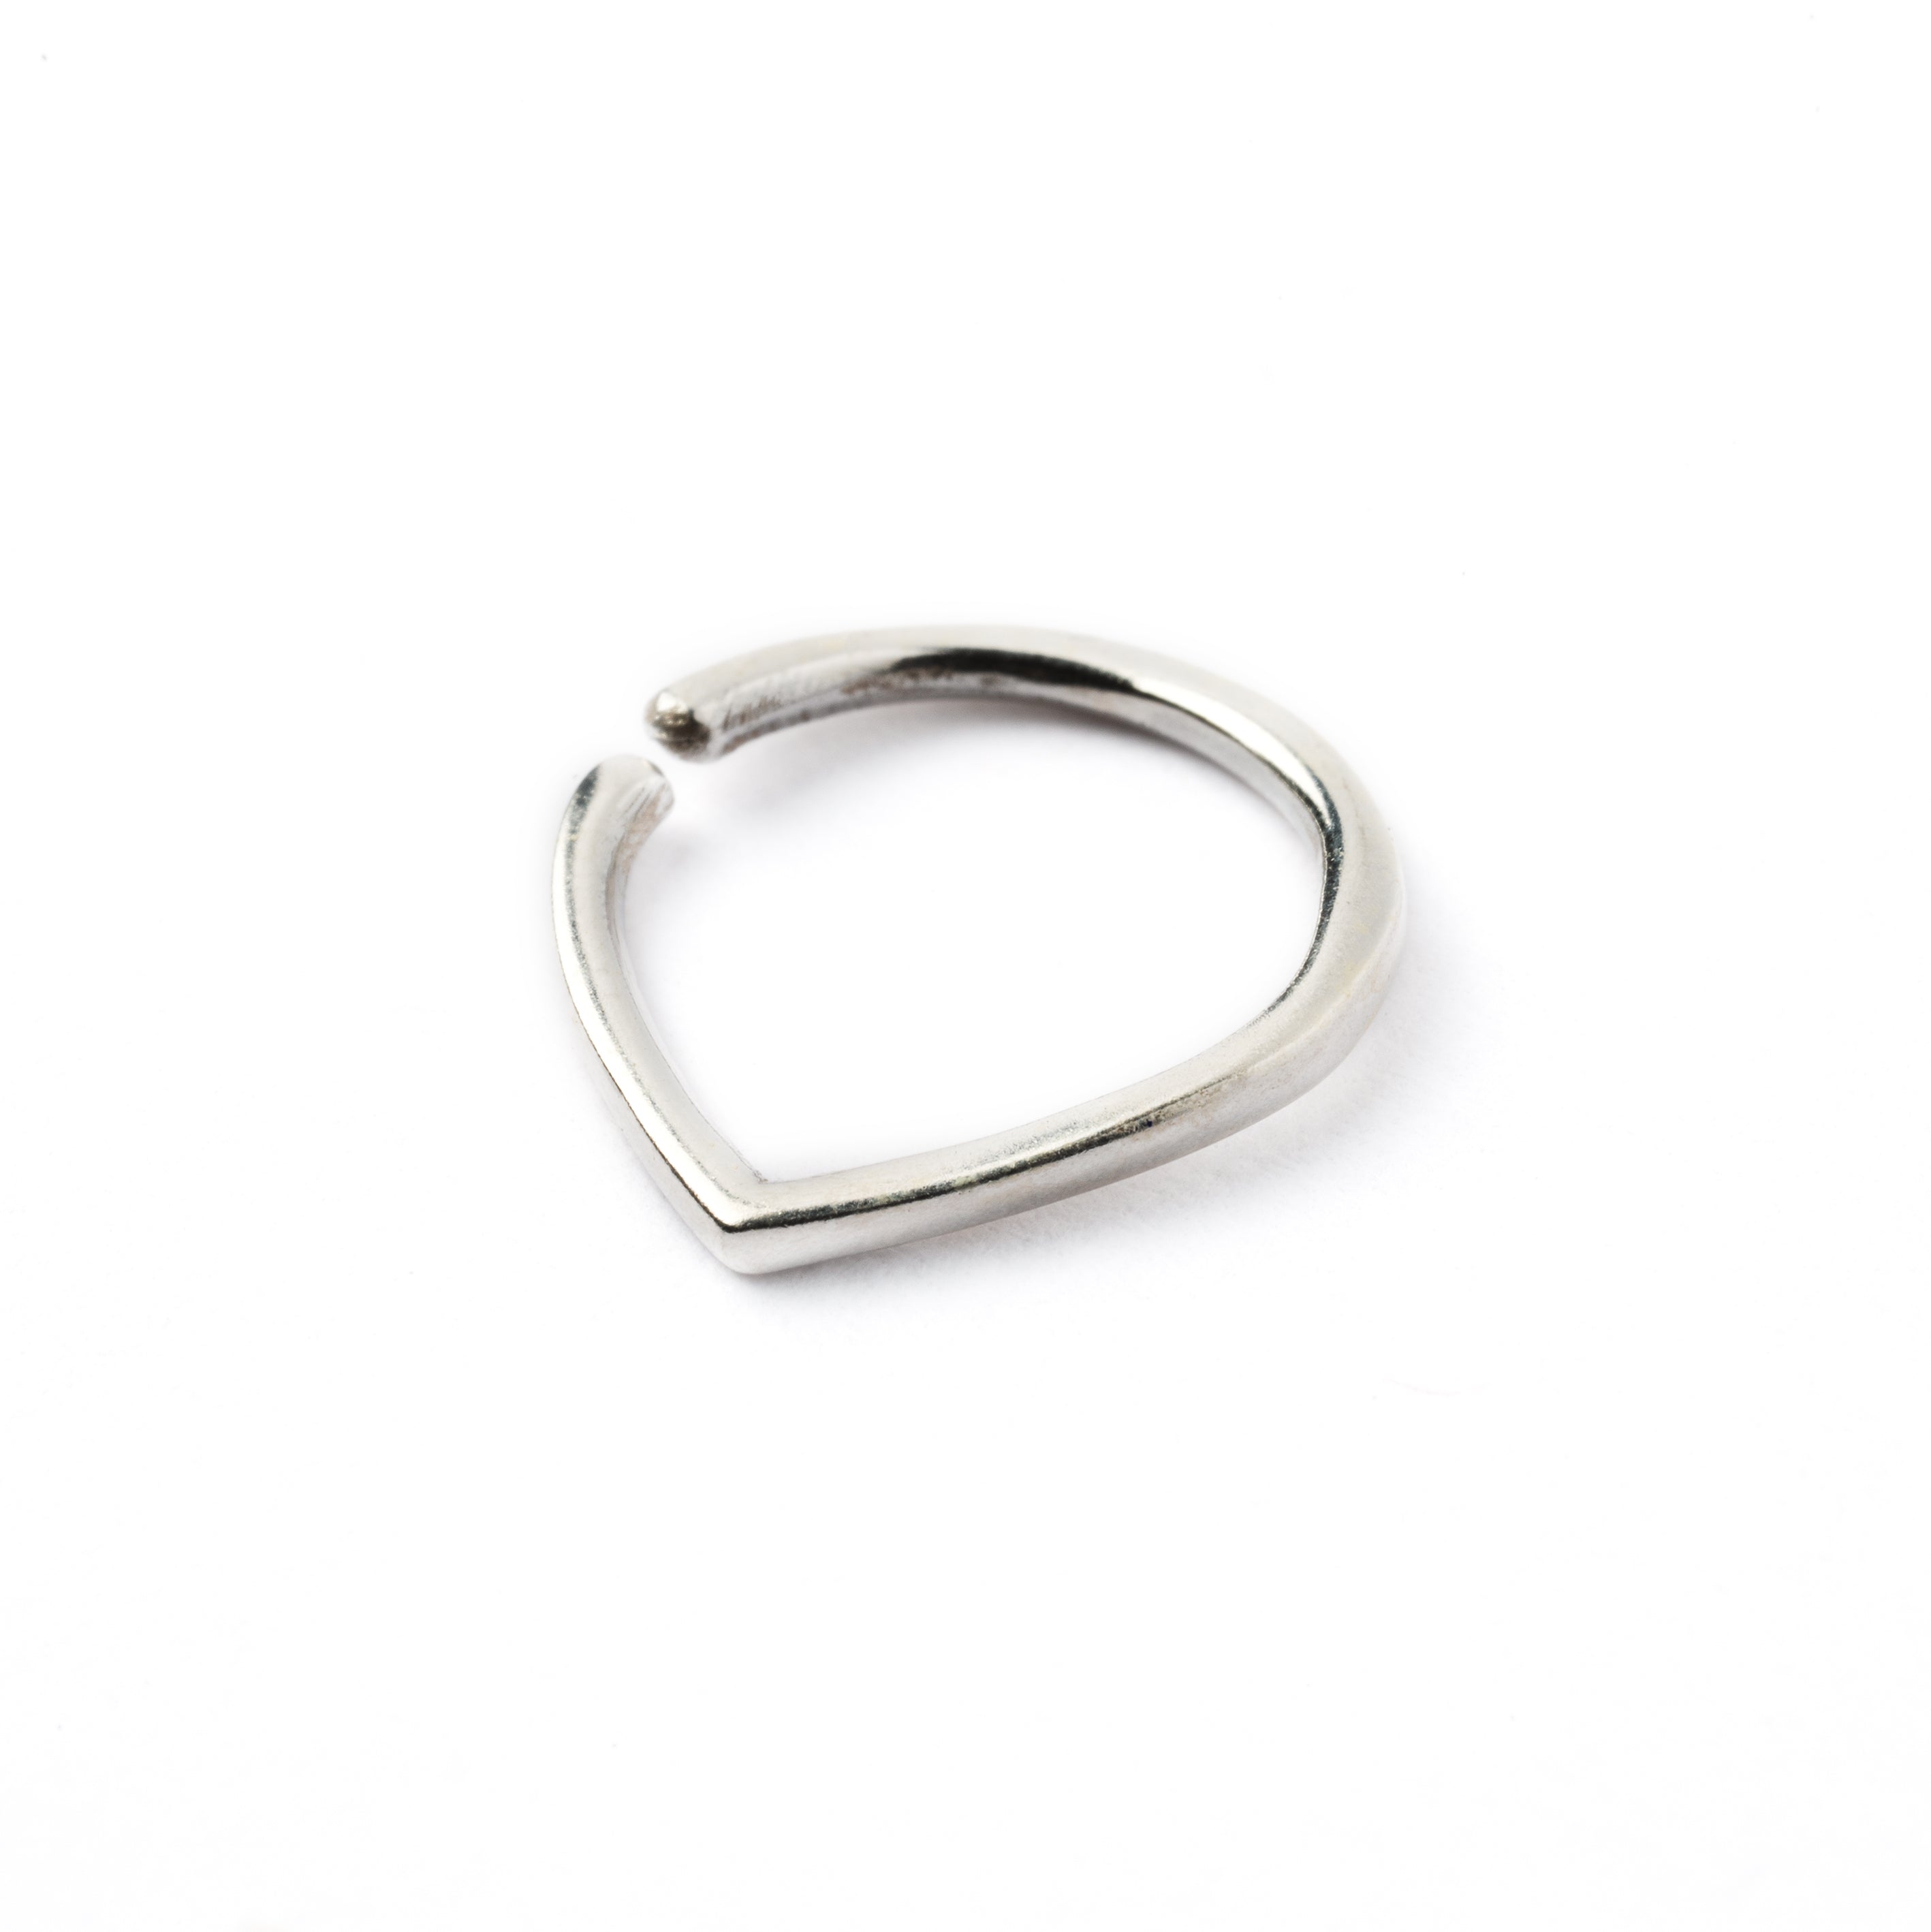 Silver teardrop septum ring right side view